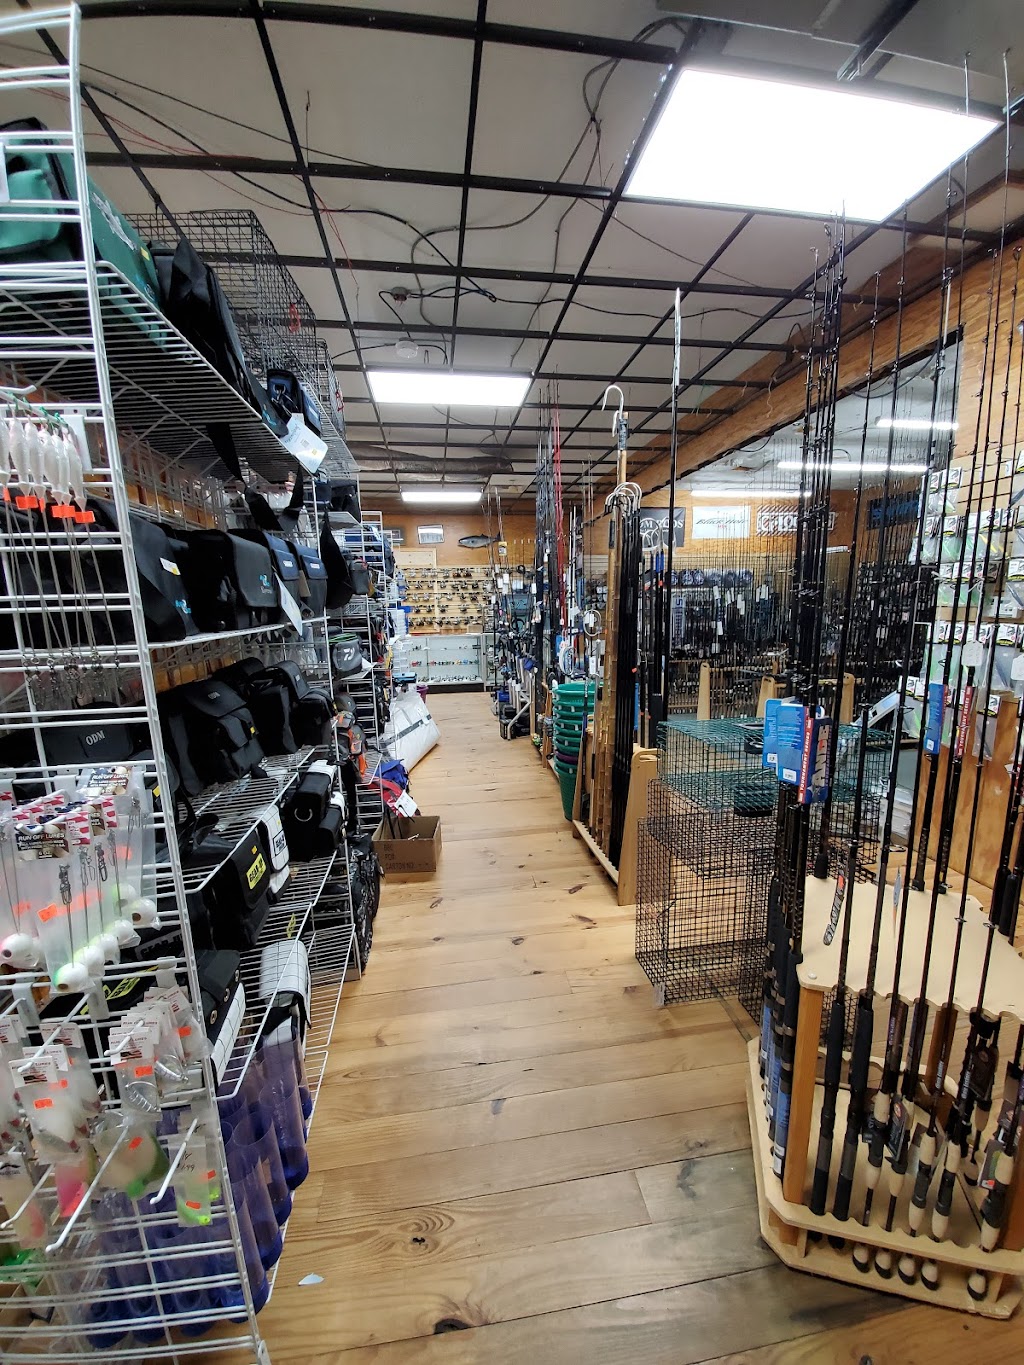 Fishermens Supply Co | Bch, 69 Channel Dr, Point Pleasant Beach, NJ 08742 | Phone: (732) 892-2058